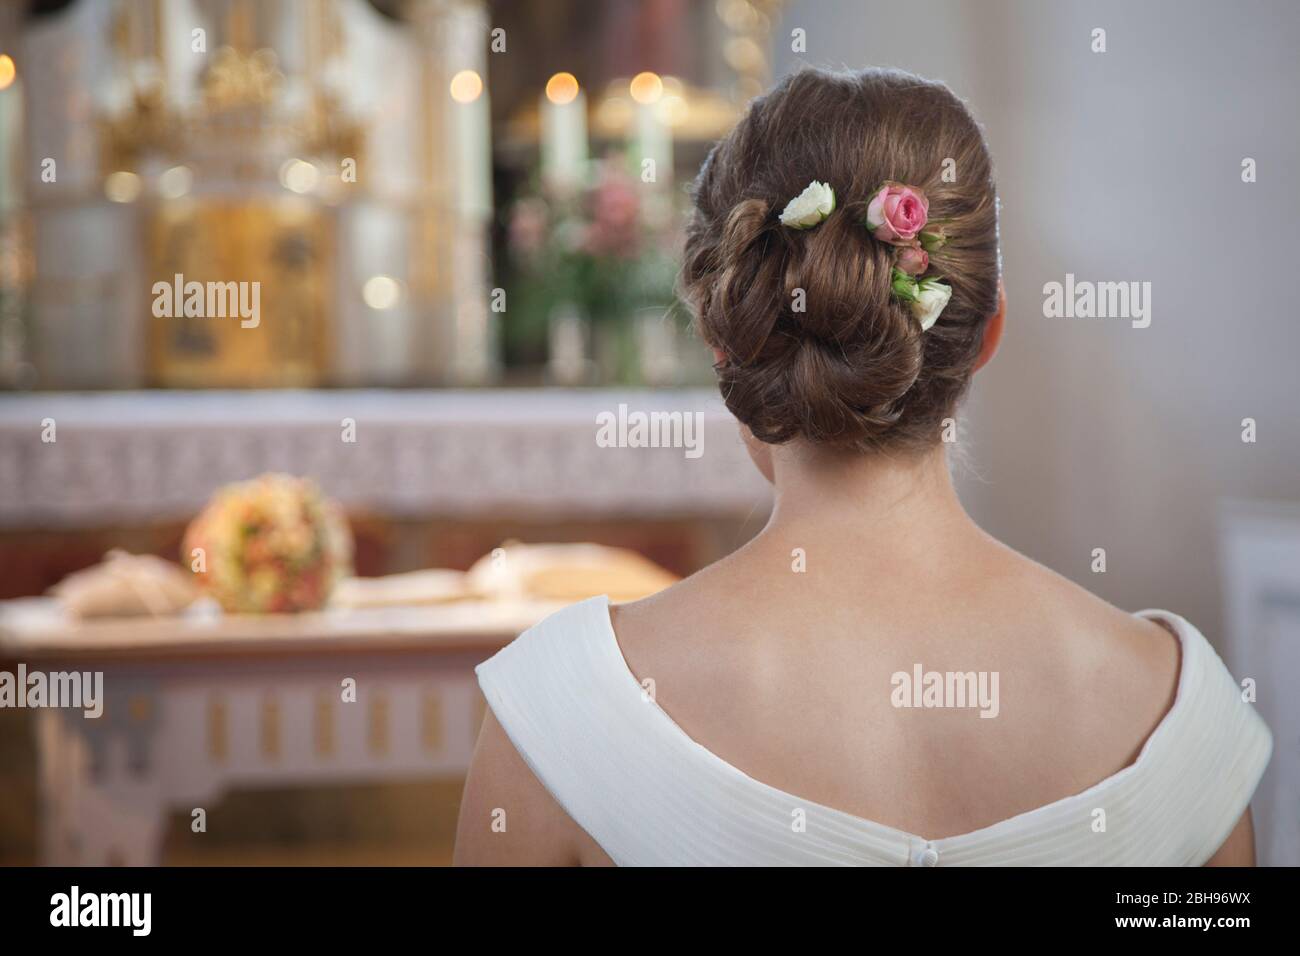 Bride from behind in the church, updo, roses in her hair Stock Photo